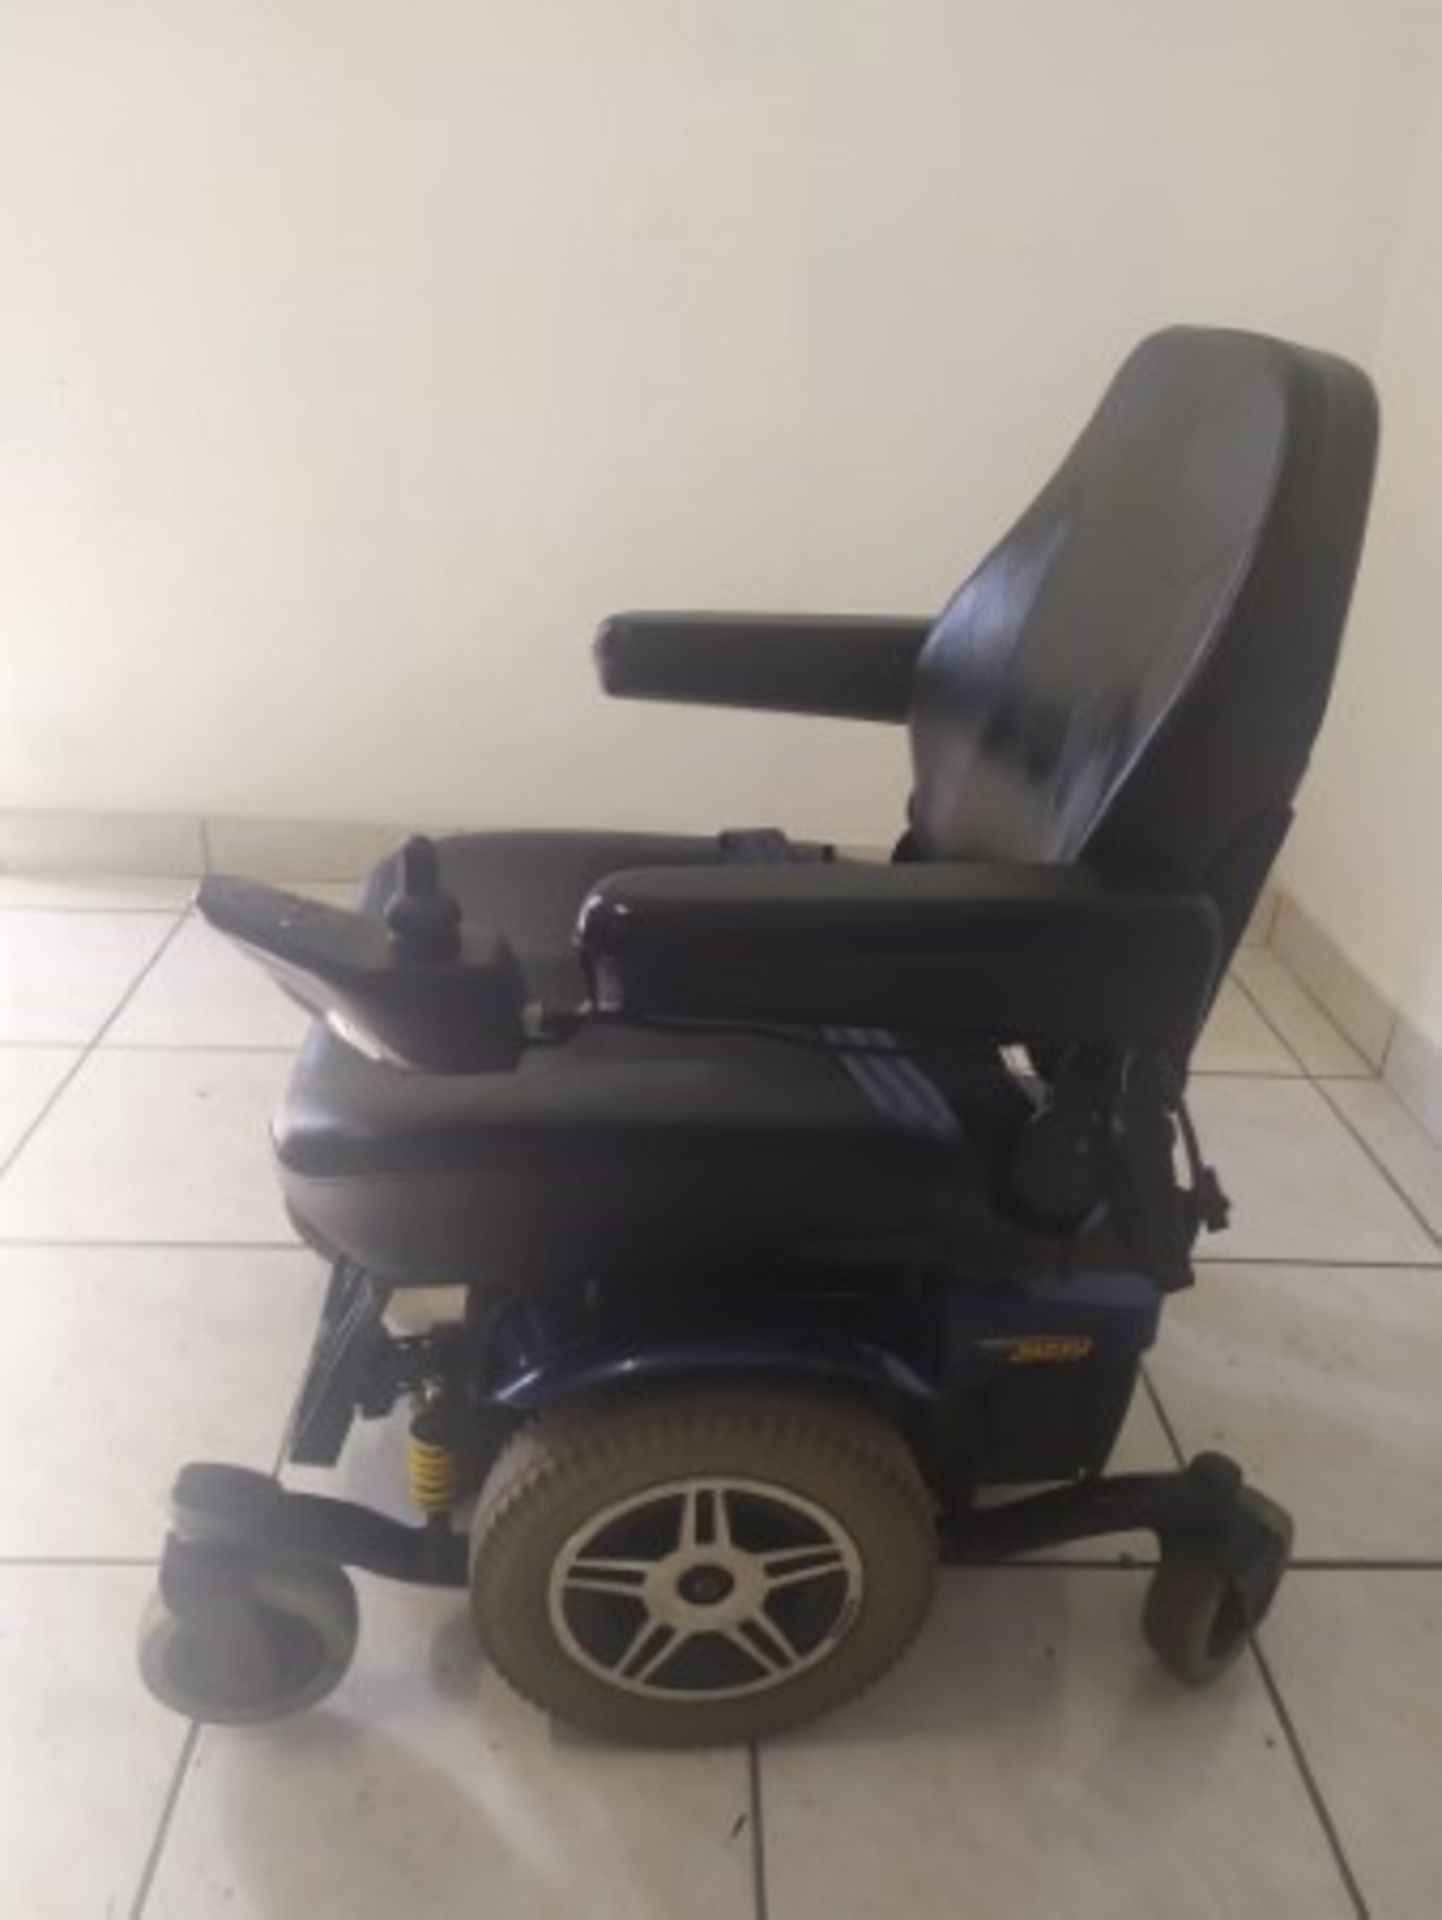 2018 PRIDE JAZZY 614 6-WHEEL POWER CHAIR - BLUE - 450LB CAPACITY - SERIAL No. J9818510038M10 (CHARGE - Image 4 of 4